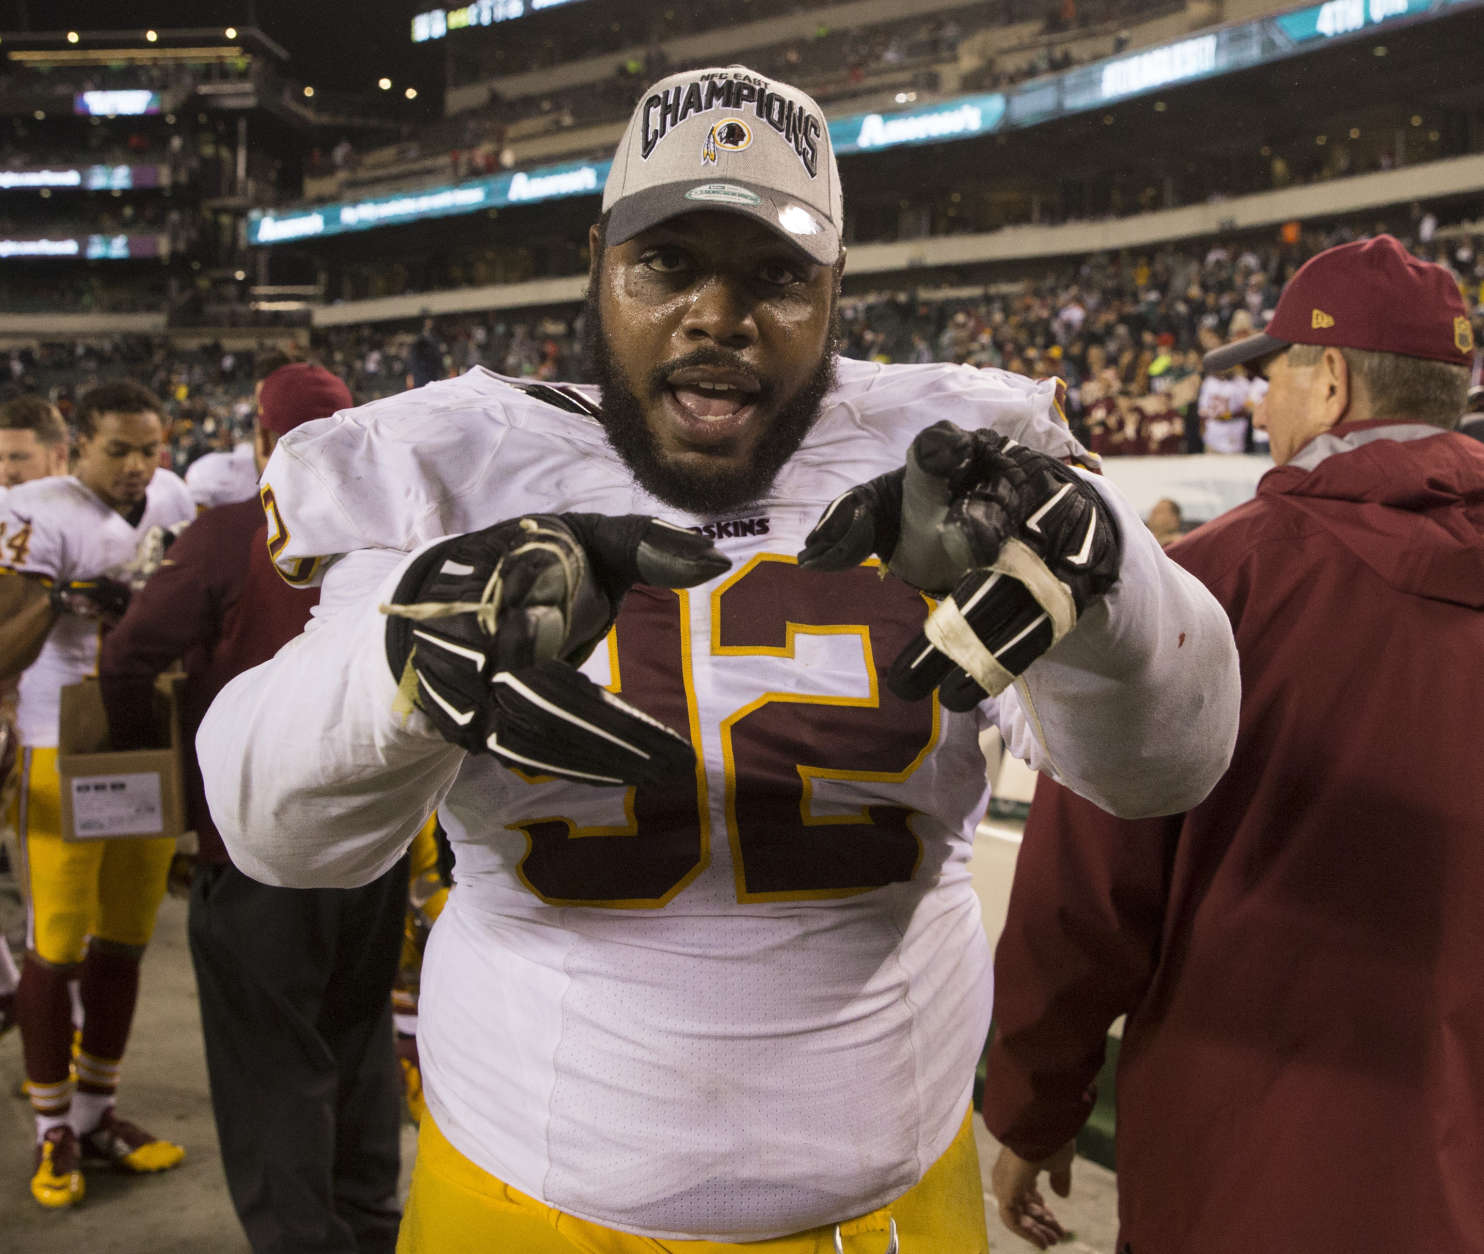 PHILADELPHIA, PA - DECEMBER 26: Chris Baker #92 of the Washington Redskins celebrates winning the NFC East division against the Philadelphia Eagles on December 26, 2015 at Lincoln Financial Field in Philadelphia, Pennsylvania. The Redskins defeated the Eagles 38-24. (Photo by Mitchell Leff/Getty Images)